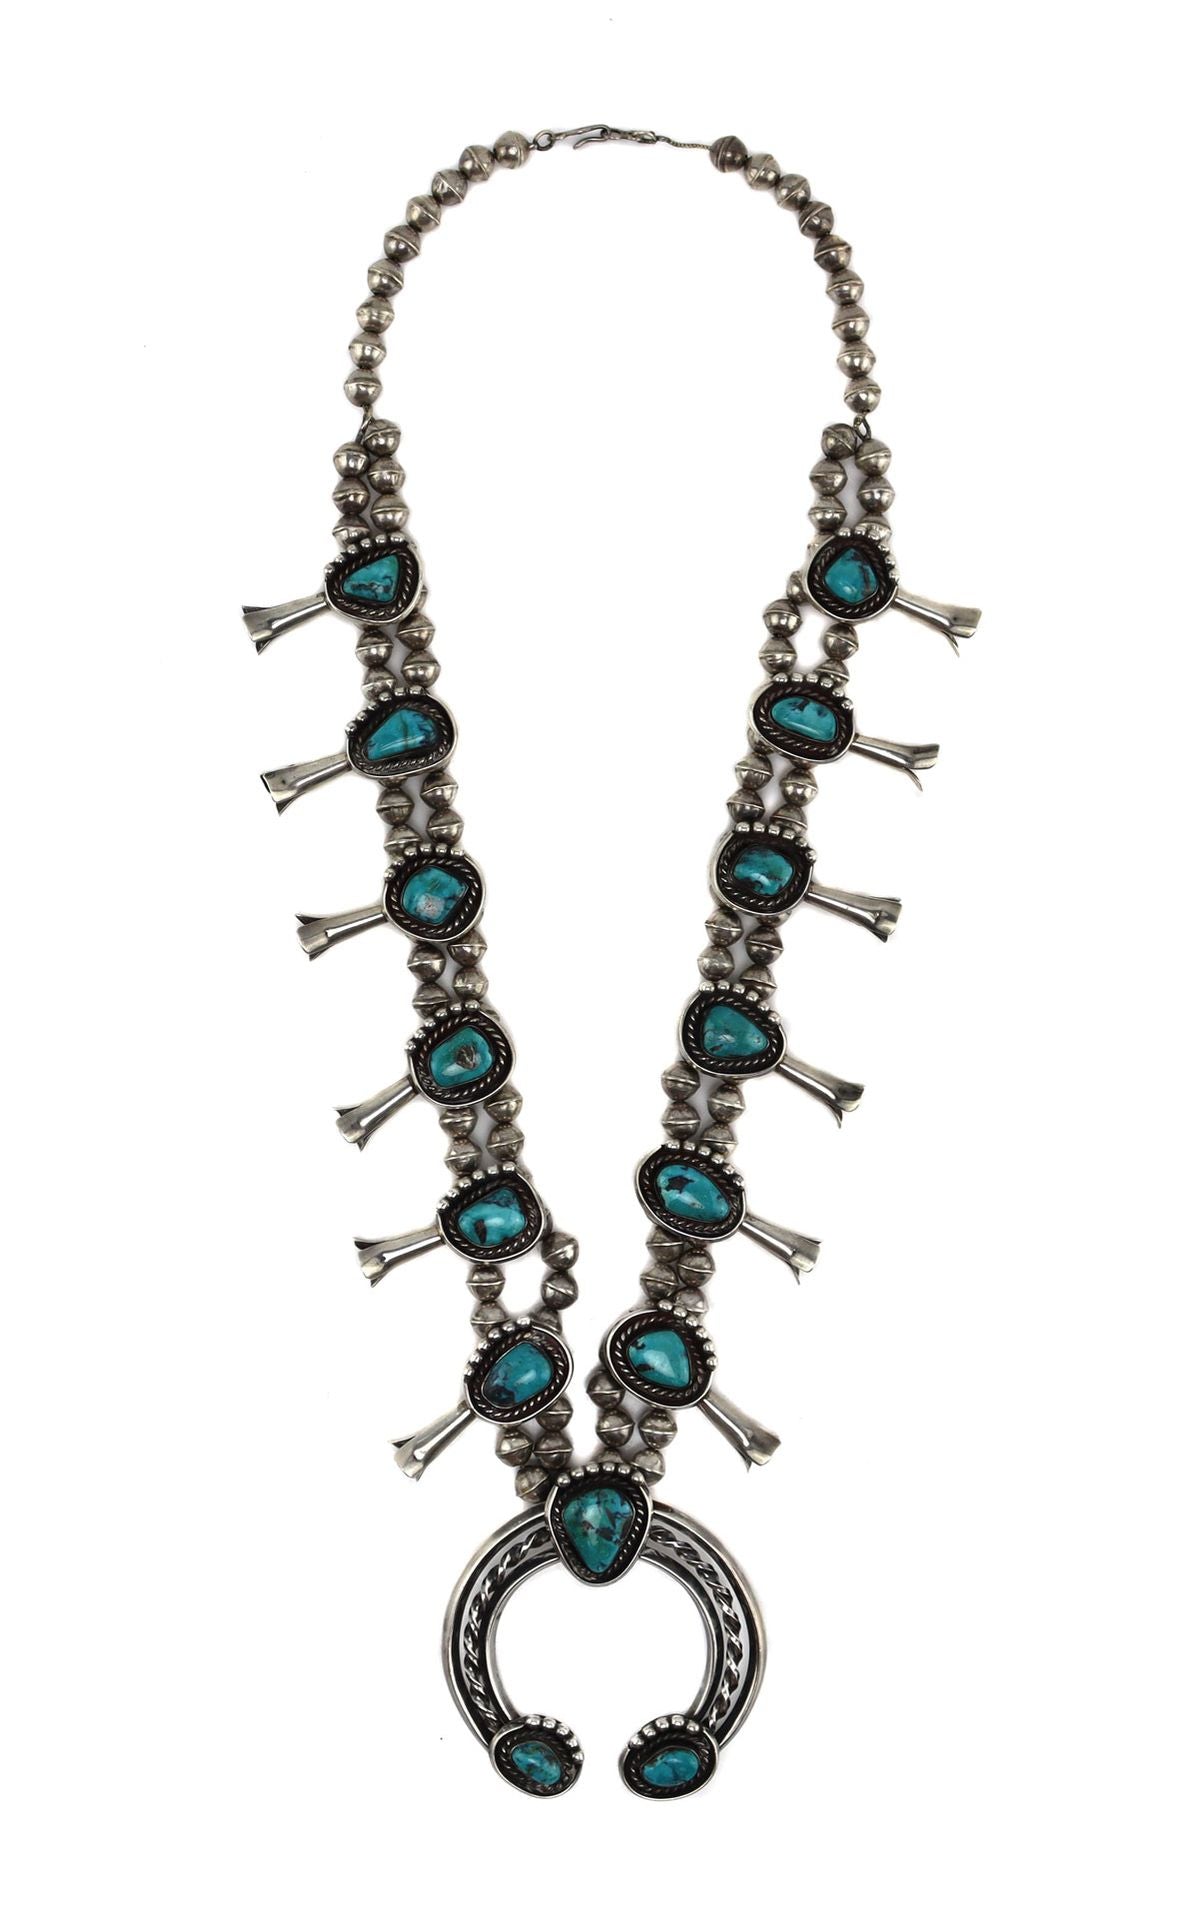 Navajo - Turquoise and Silver Squash Blossom Necklace c. 1950s, 27" length